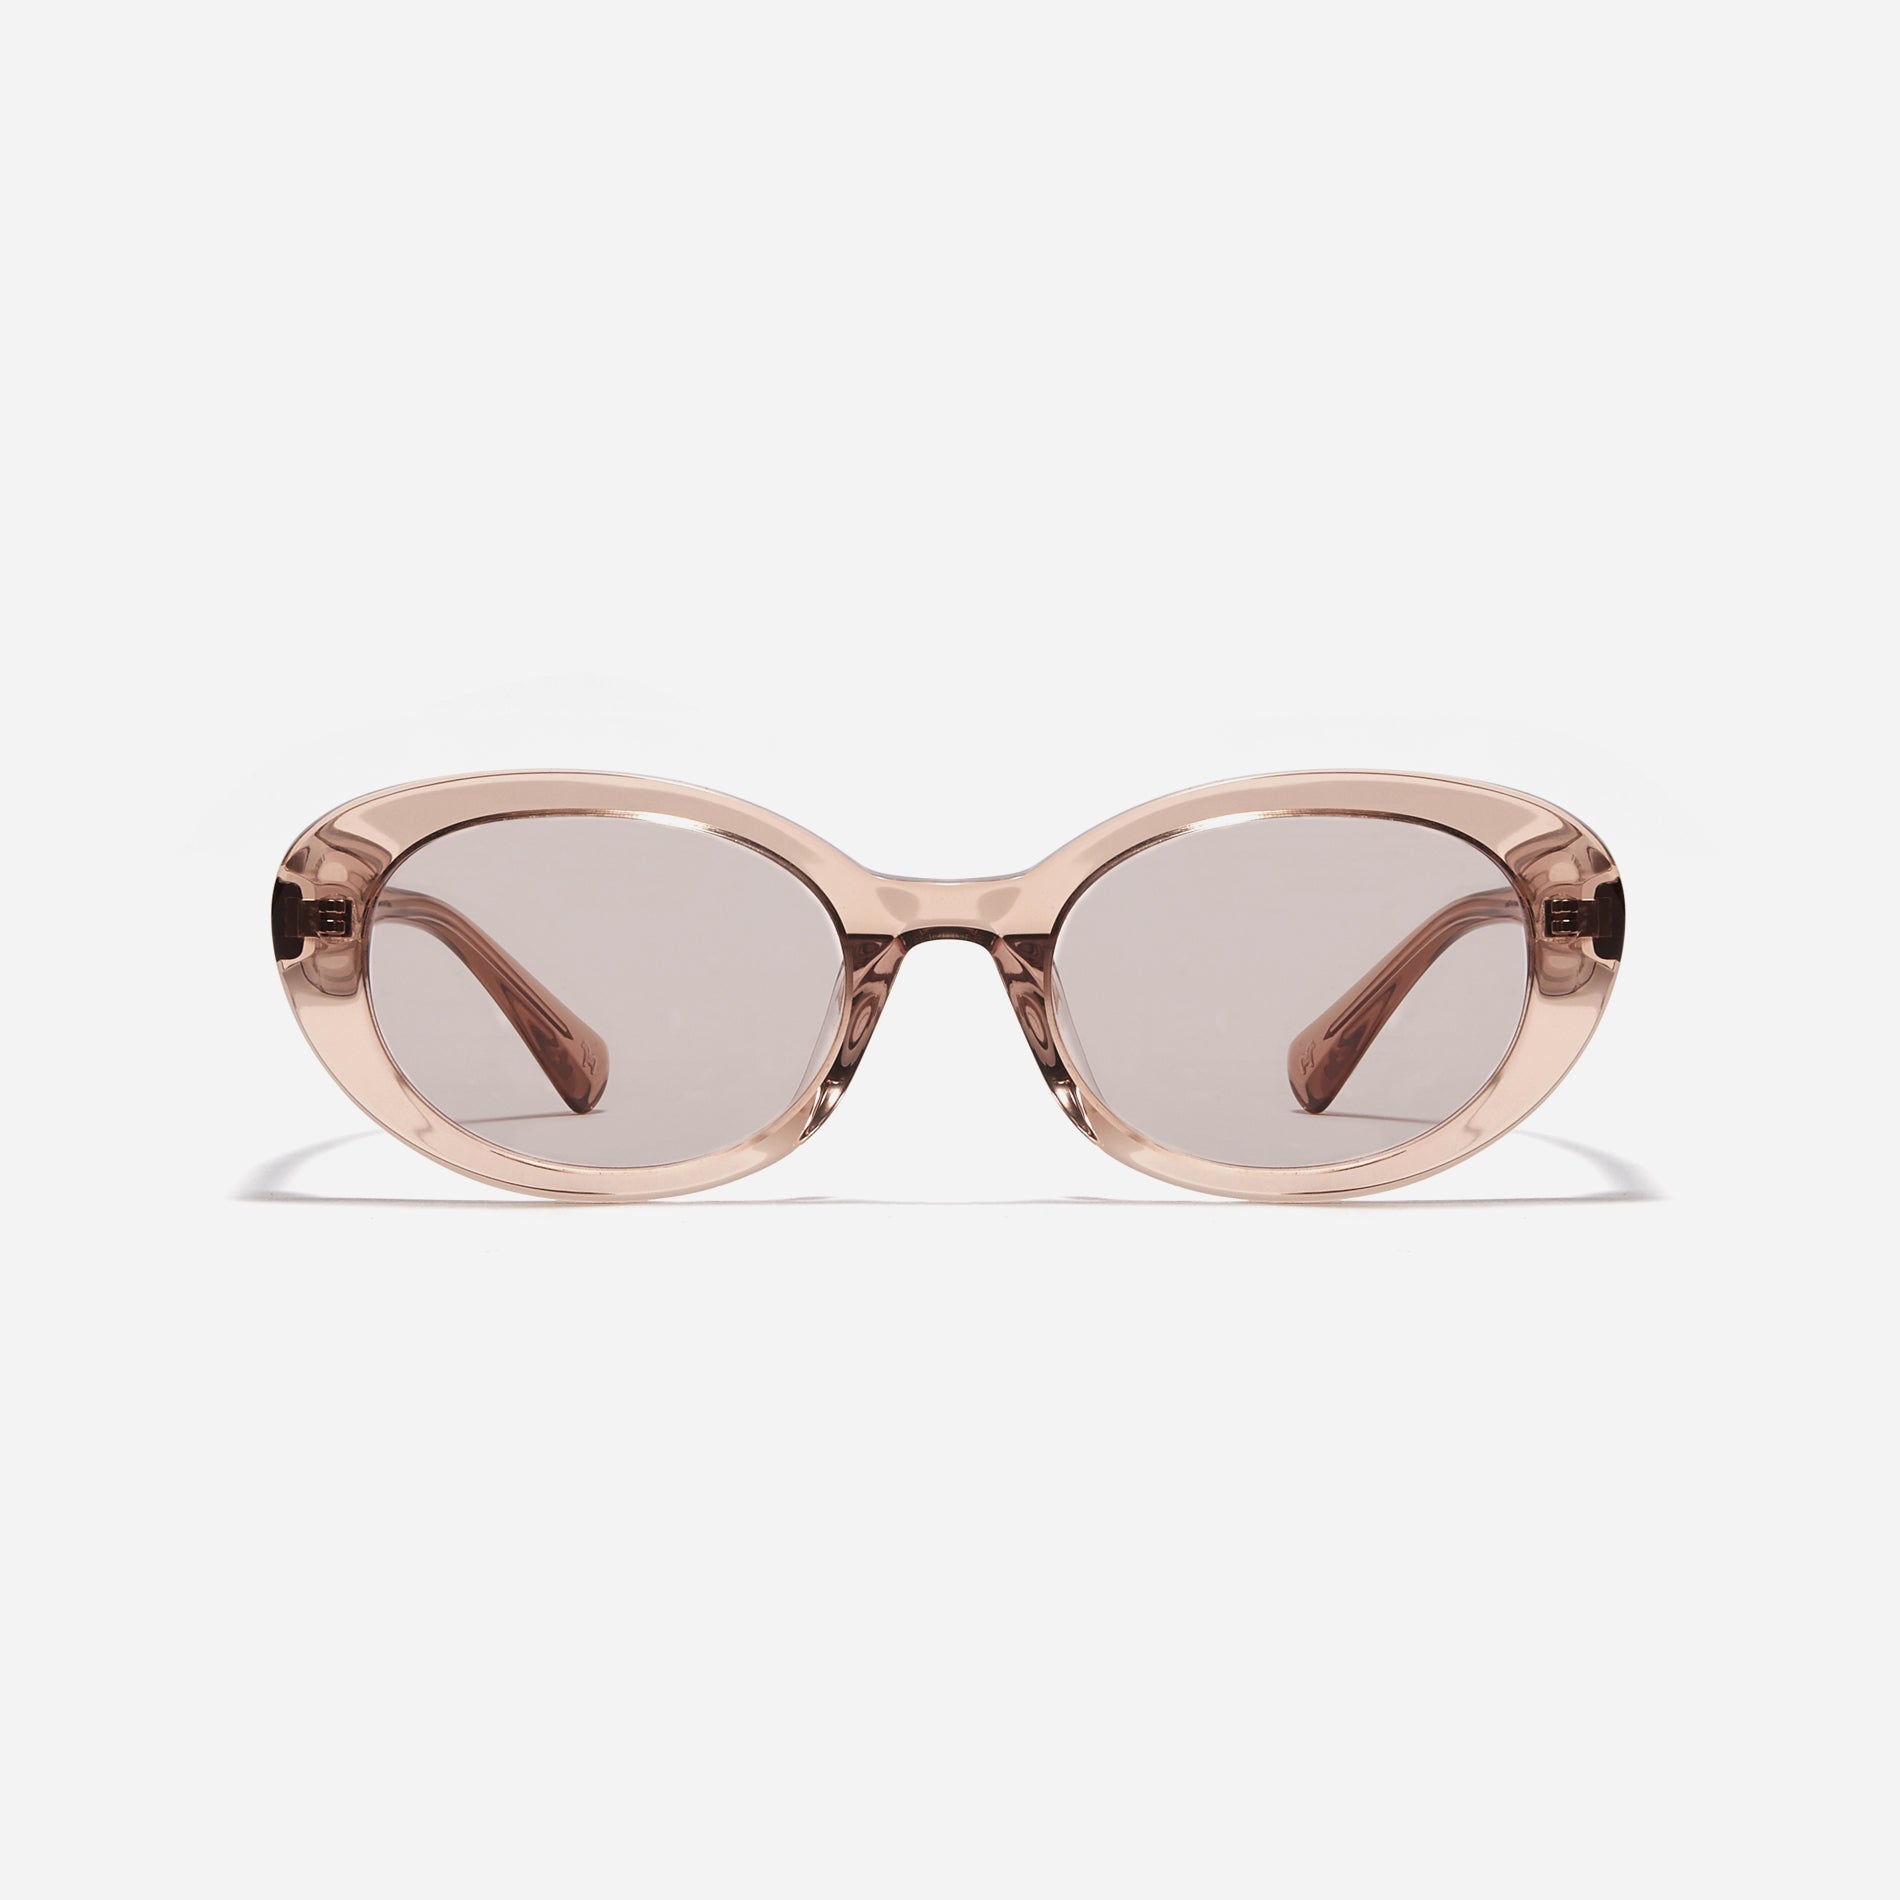 Round-shaped petite frame sunglasses with retro-inspired design that exudes chic and contemporary vibe. 